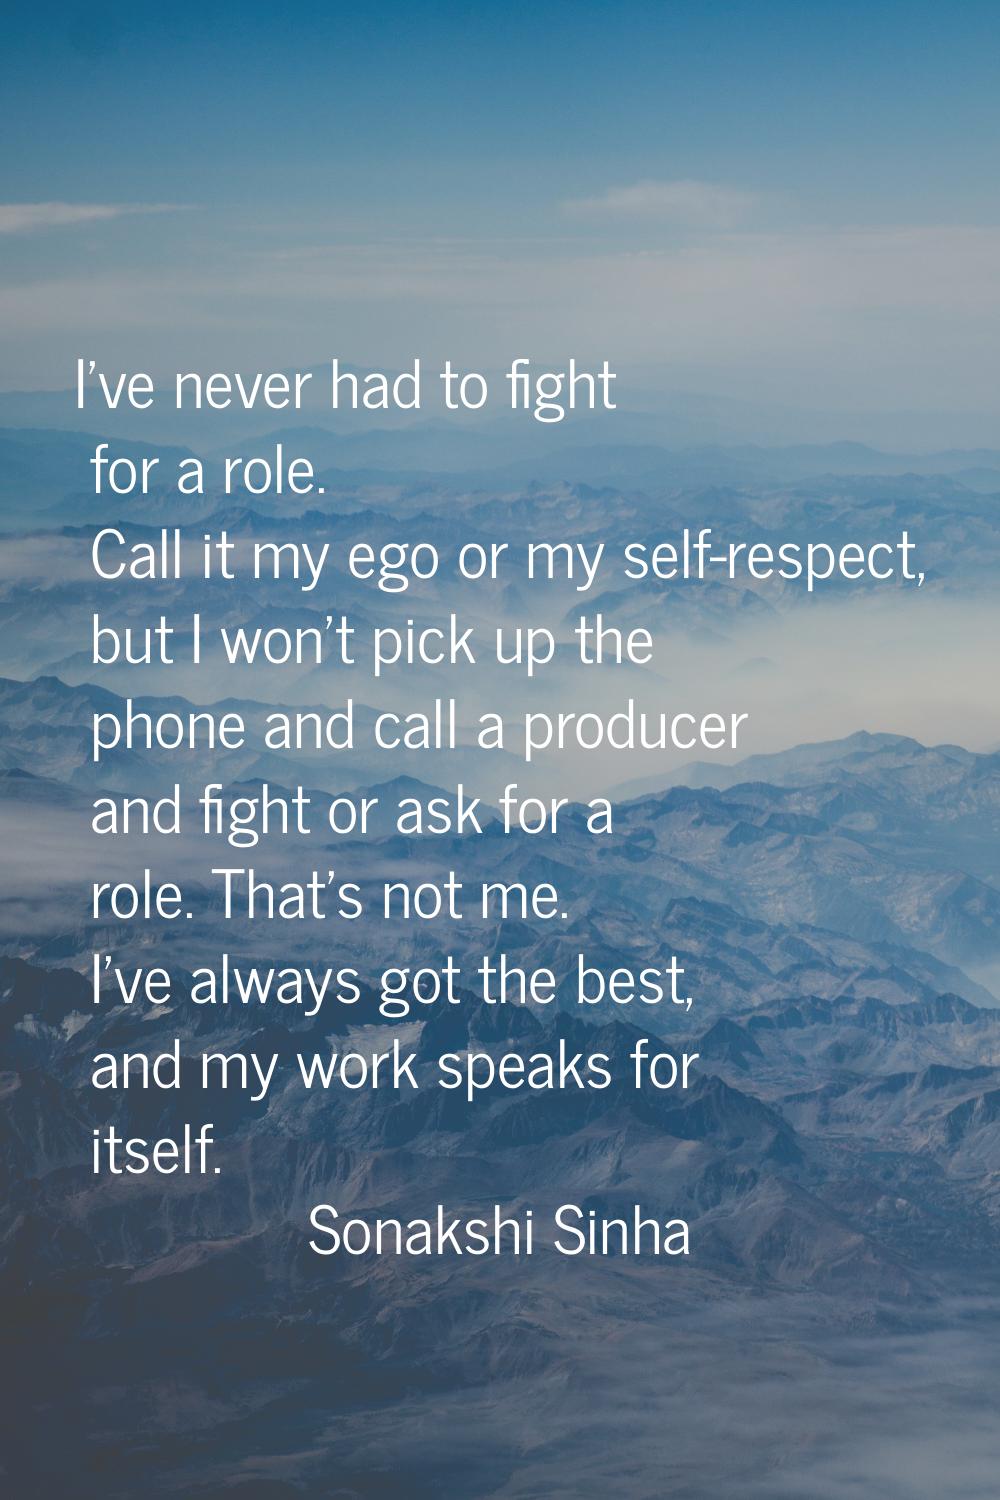 I've never had to fight for a role. Call it my ego or my self-respect, but I won't pick up the phon